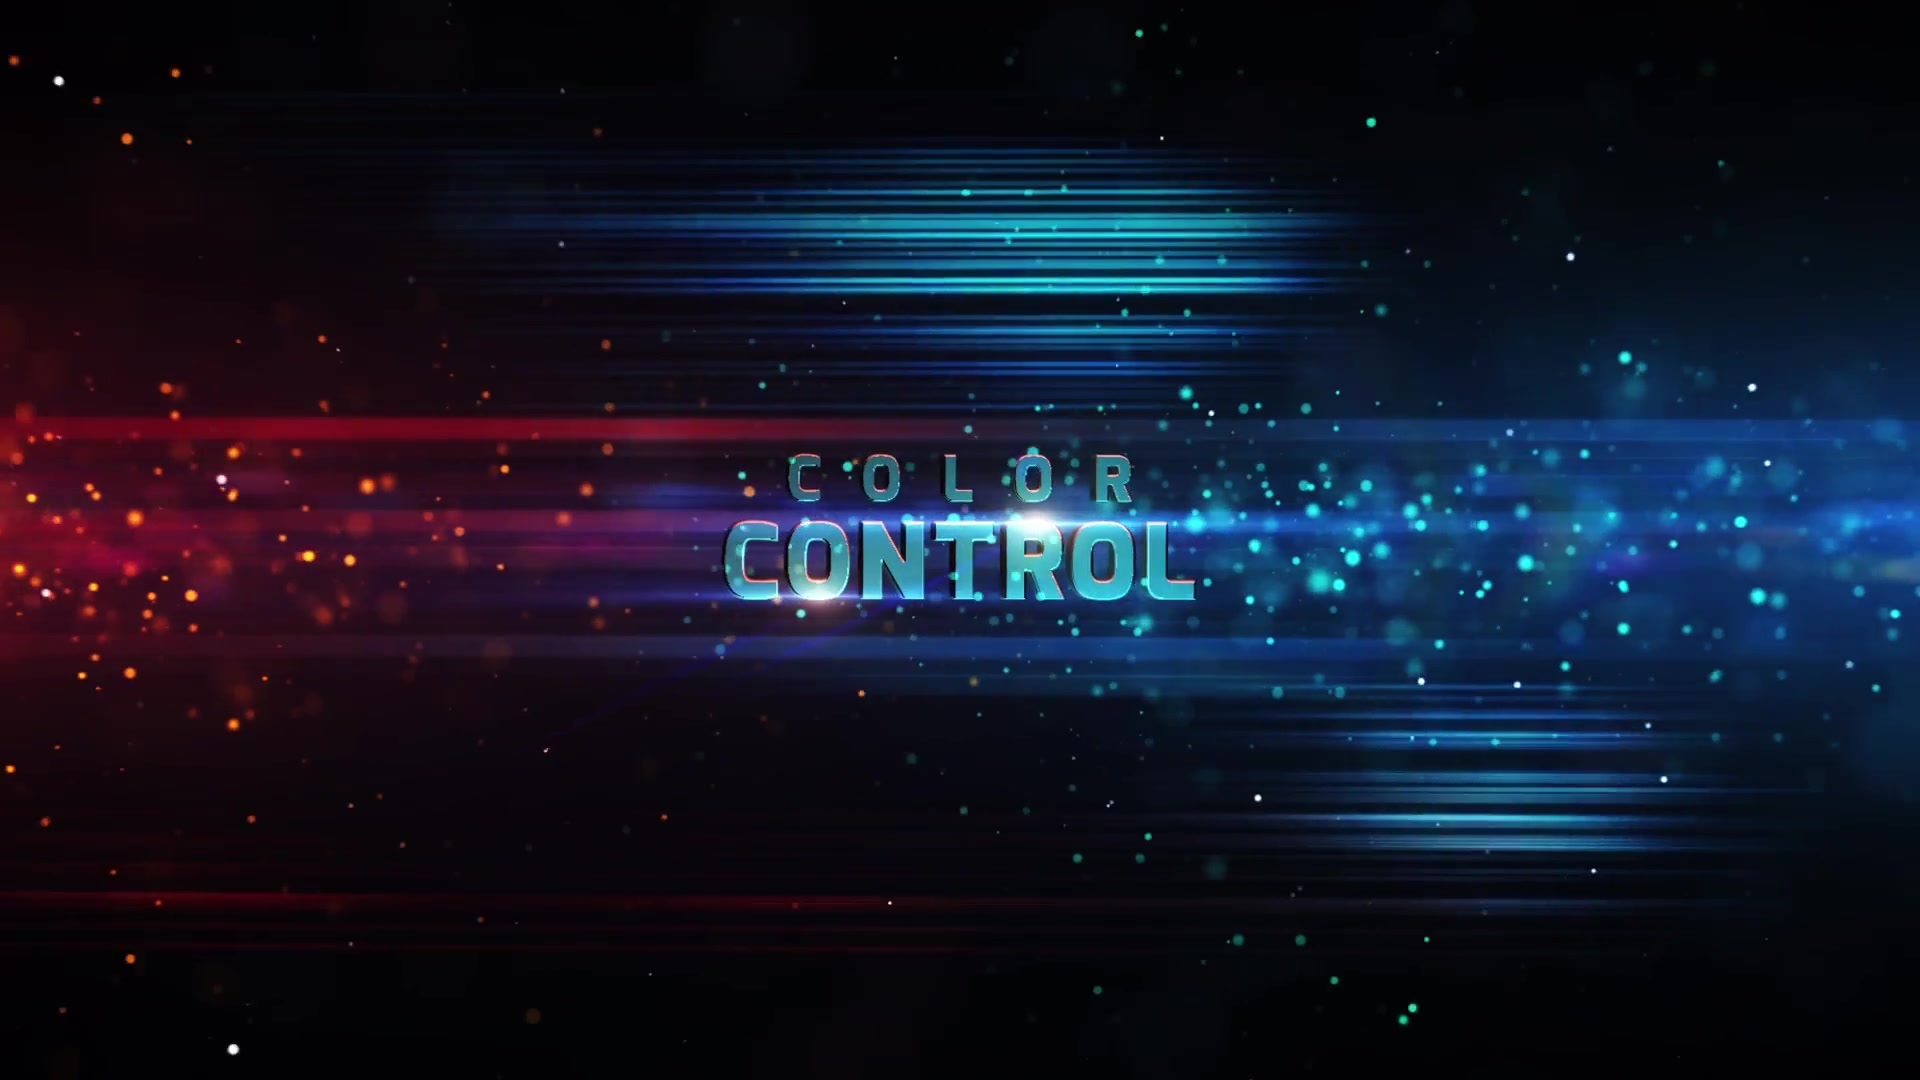 Abstract Particles Titles - Download Videohive 23346327